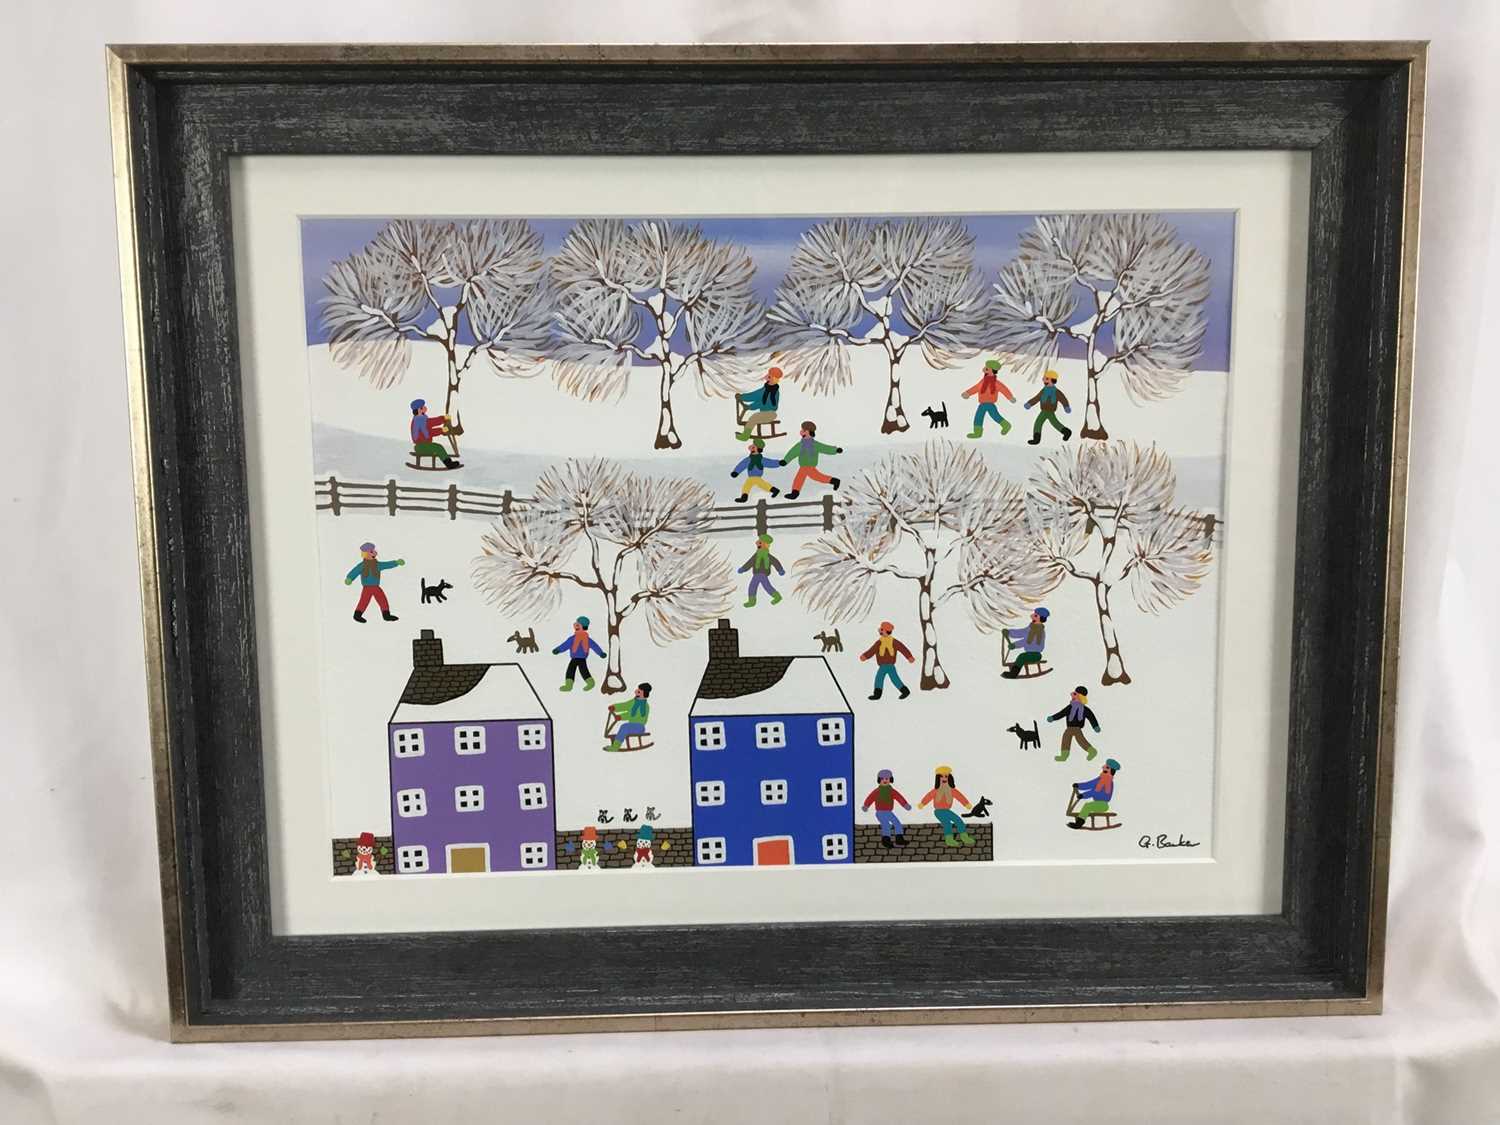 Gordon Barker (b.1960) acrylic on paper - A Snow Day, signed, 25cm x 34.5cm, in glazed frame - Image 2 of 4